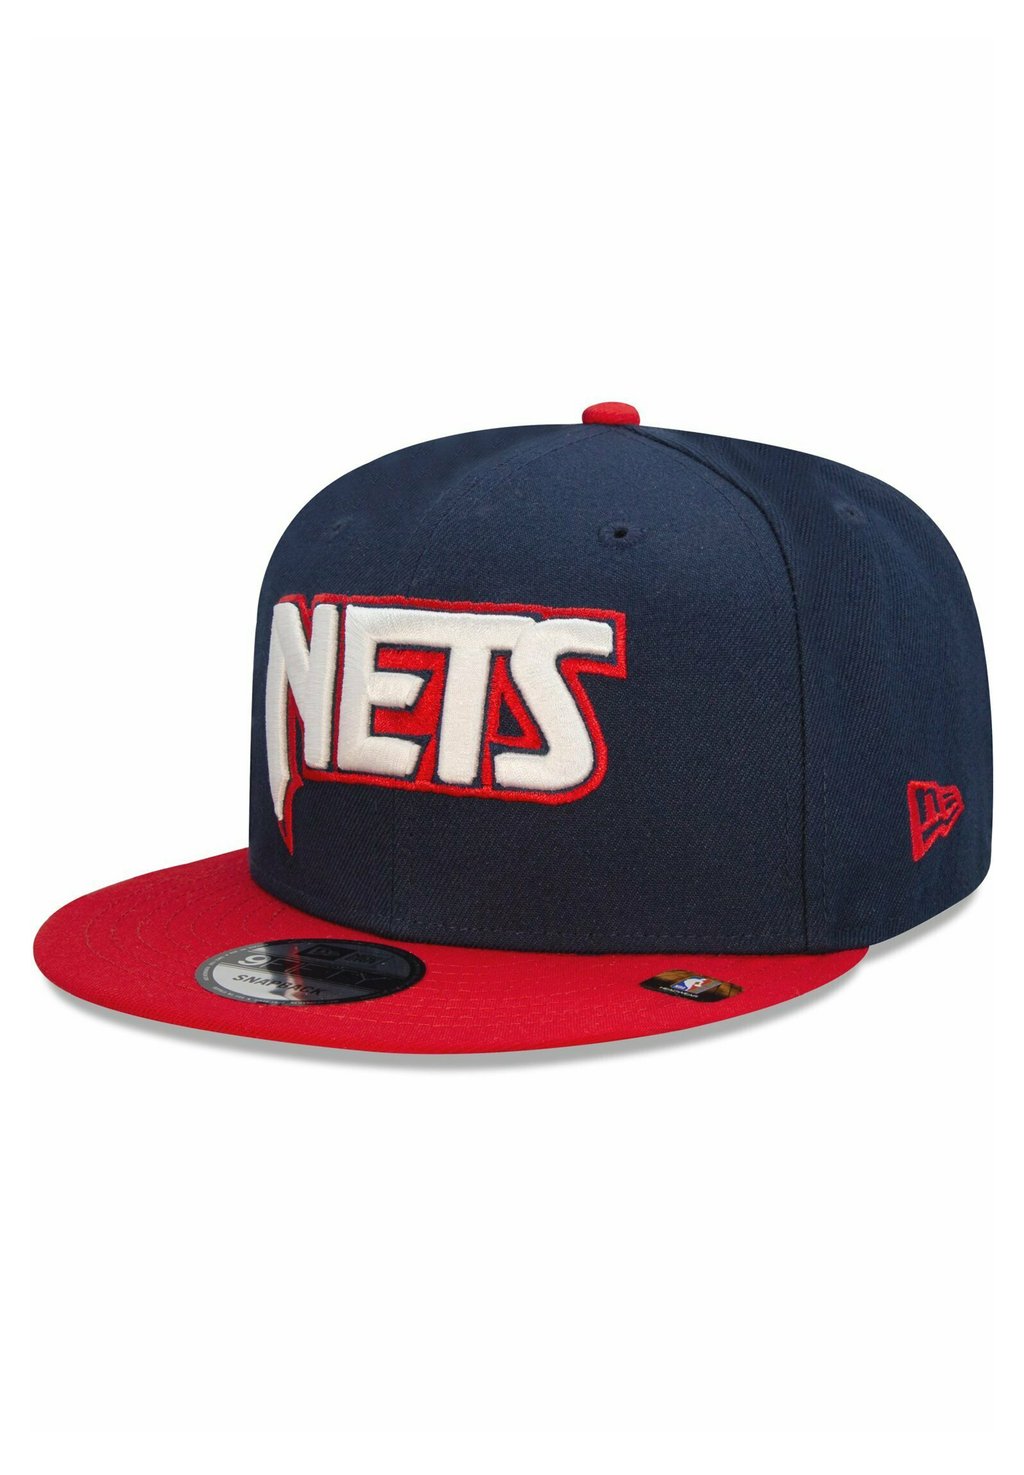 Бейсболка 9FIFTY NBA AUTHENTICS CITY OFFICIAL New Era, цвет brooklyn nets 2021 new garden fences and crop protection nets breeding nets fencing nets flower and fruit anti bird and insect proof nets